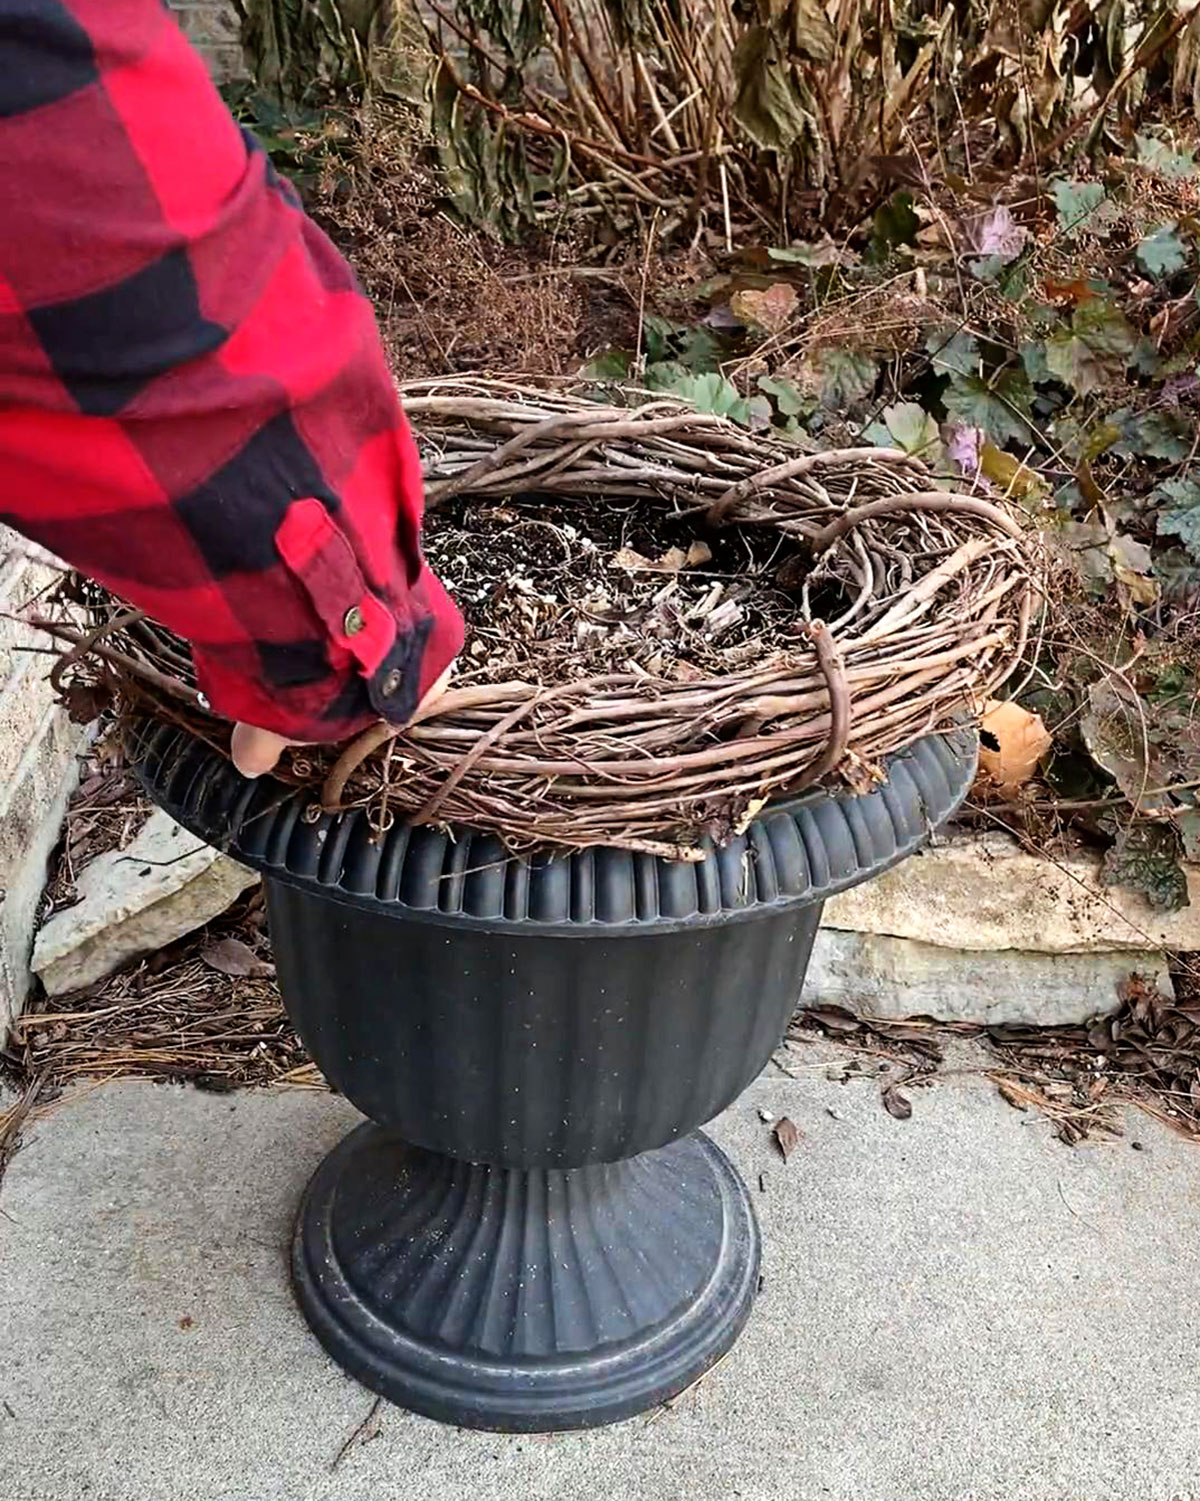 Placing a plain grapevine wreath on an urn for winter porch decor.